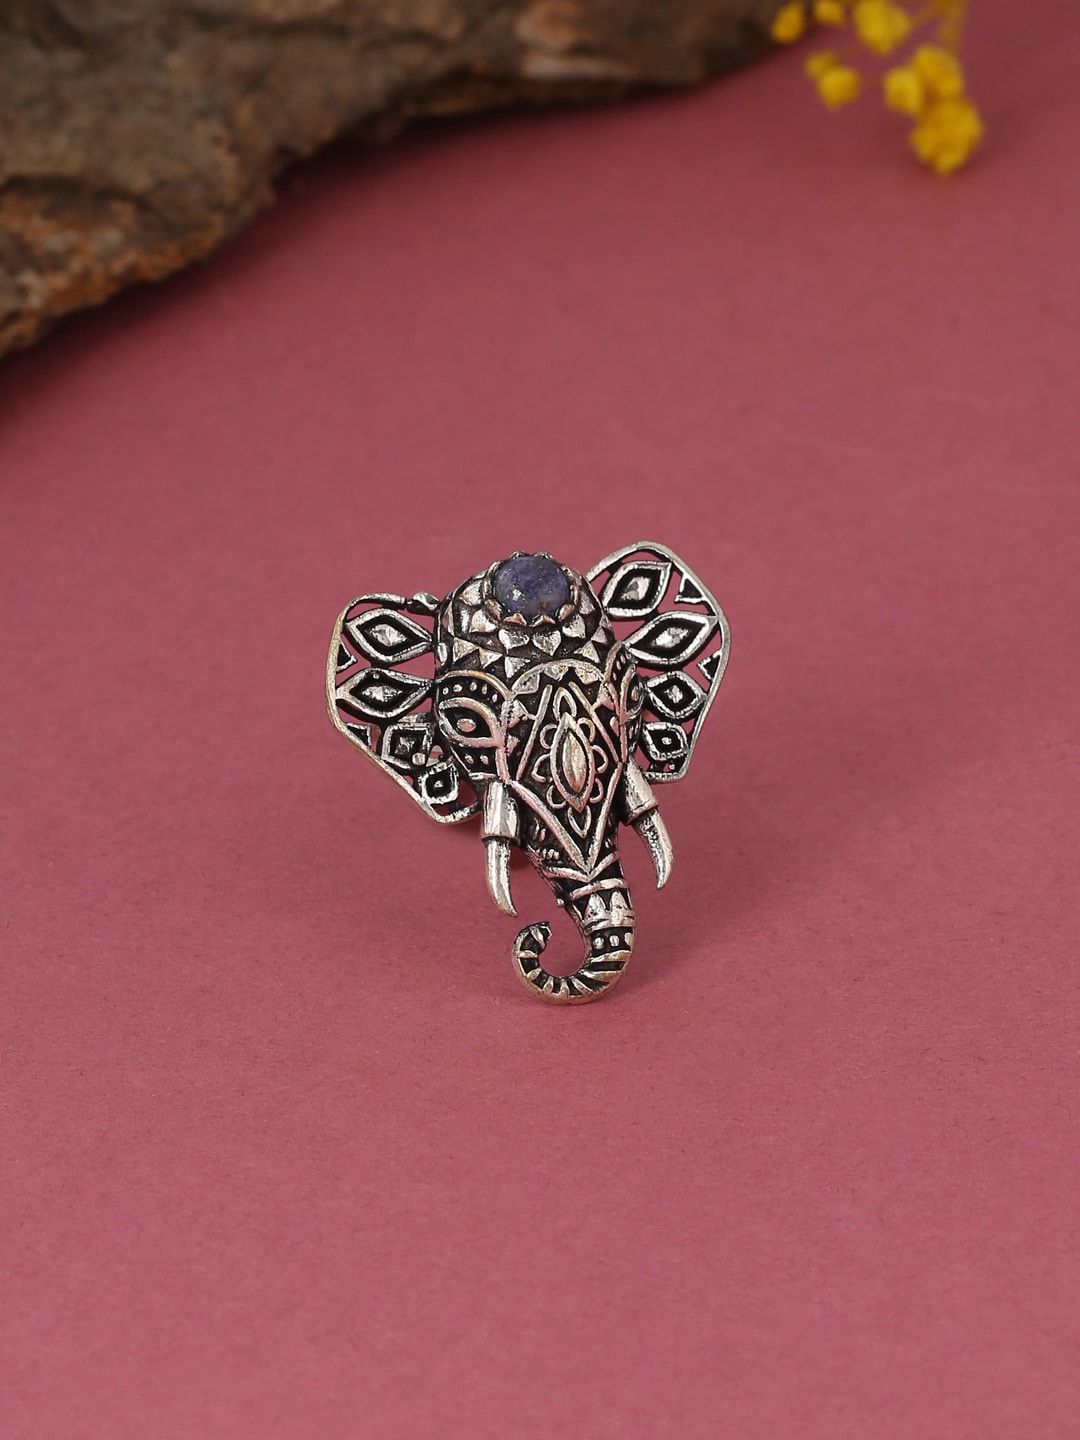 kashwini Silver-Plated Blue Stone-Studded Finger Ring Price in India